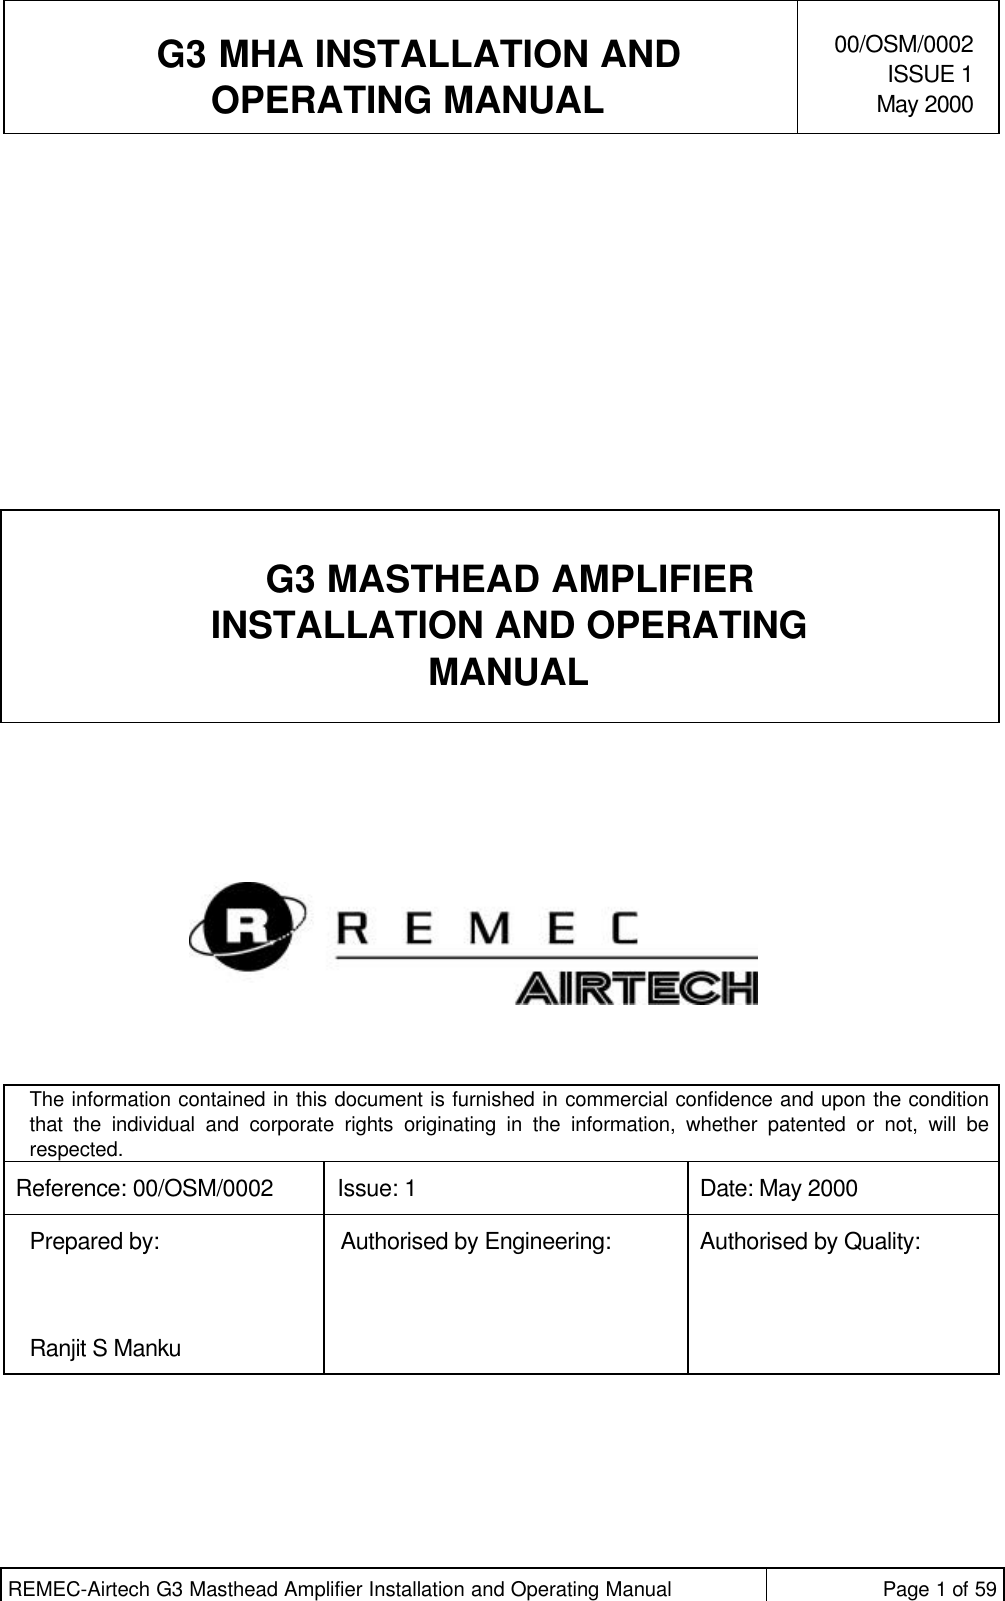   G3 MHA INSTALLATION ANDOPERATING MANUAL00/OSM/0002ISSUE 1May 2000REMEC-Airtech G3 Masthead Amplifier Installation and Operating Manual Page 1 of 59G3 MASTHEAD AMPLIFIERINSTALLATION AND OPERATINGMANUALThe information contained in this document is furnished in commercial confidence and upon the conditionthat the individual and corporate rights originating in the information, whether patented or not, will berespected.Reference: 00/OSM/0002 Issue: 1 Date: May 2000Prepared by:Ranjit S MankuAuthorised by Engineering: Authorised by Quality: